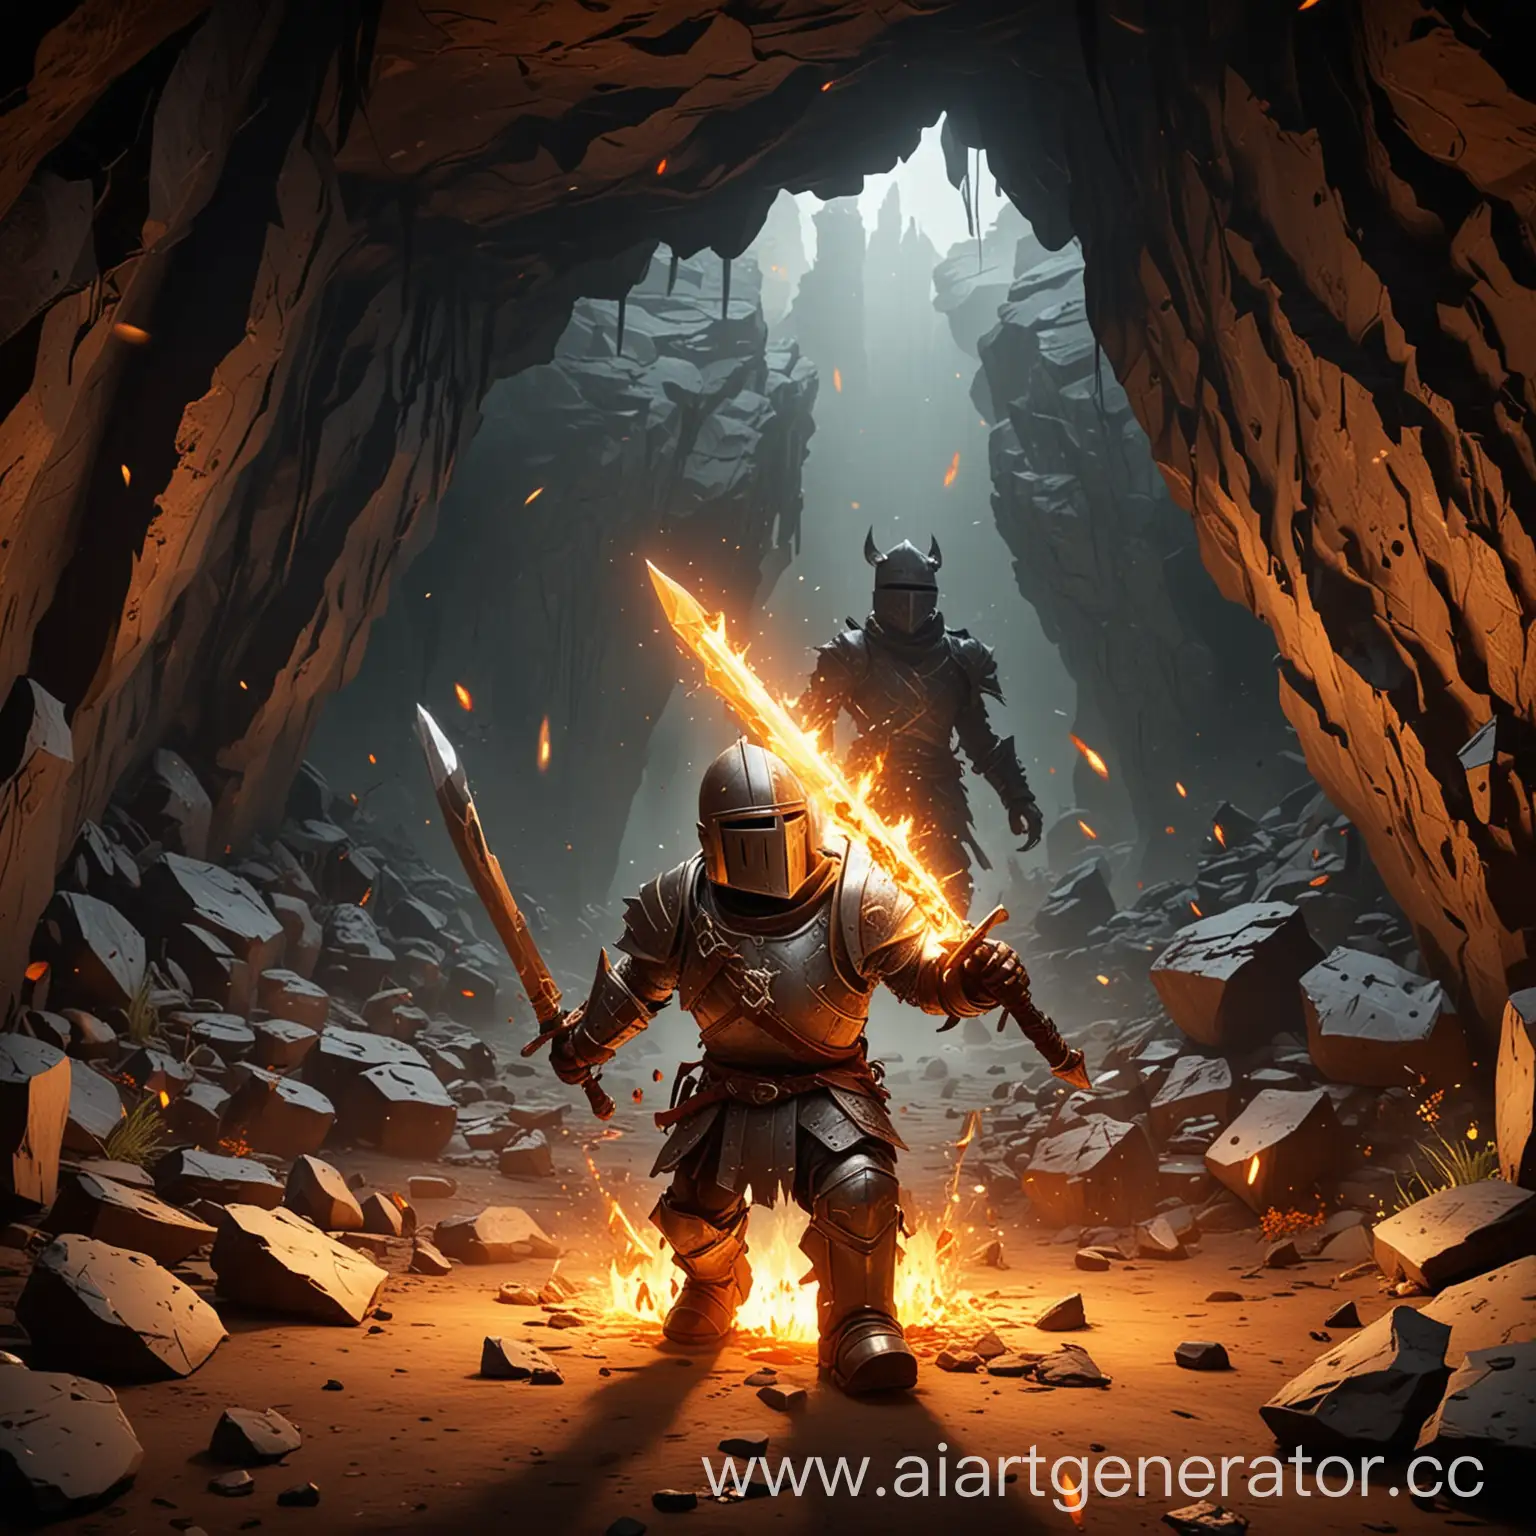 Fantasy-Knight-Emerges-from-Cave-with-Fiery-Portal-in-Portal-Pets-The-Ultimate-Adventure